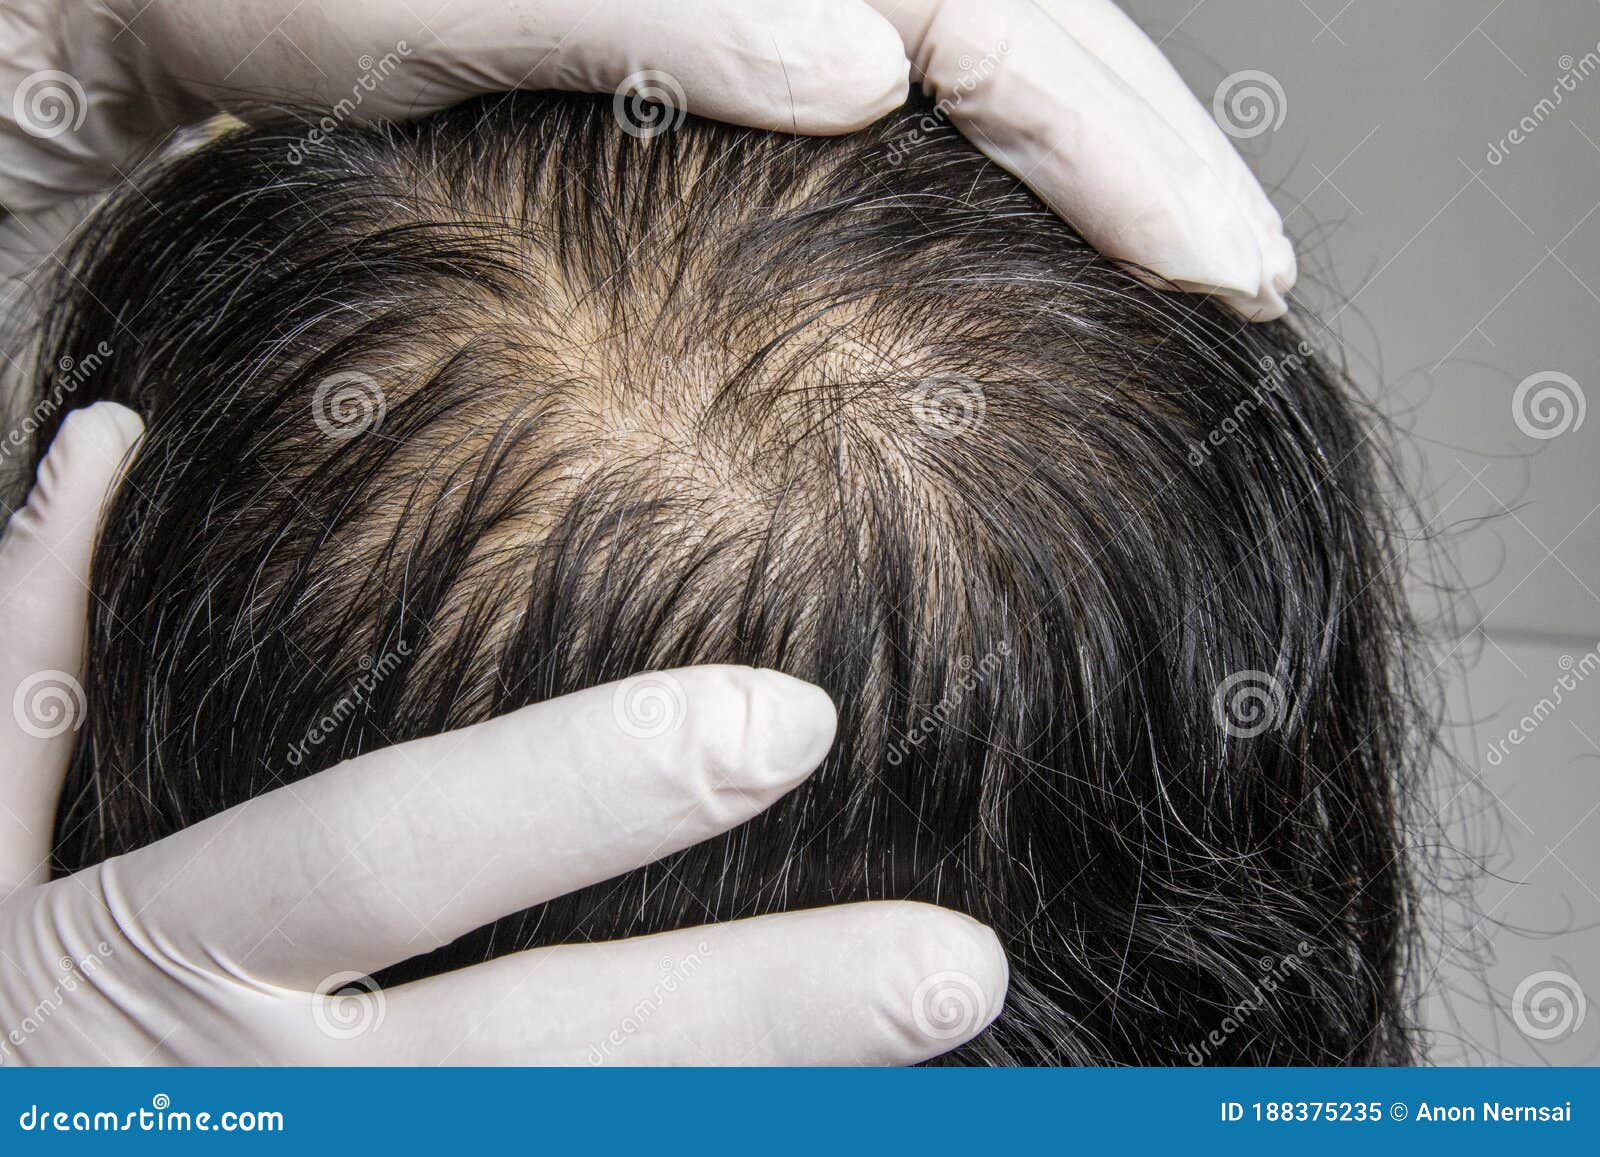 A Man Visits Dermatologist for His Hair Fall Problem. Stock Image - Image  of examination, glass: 188375235